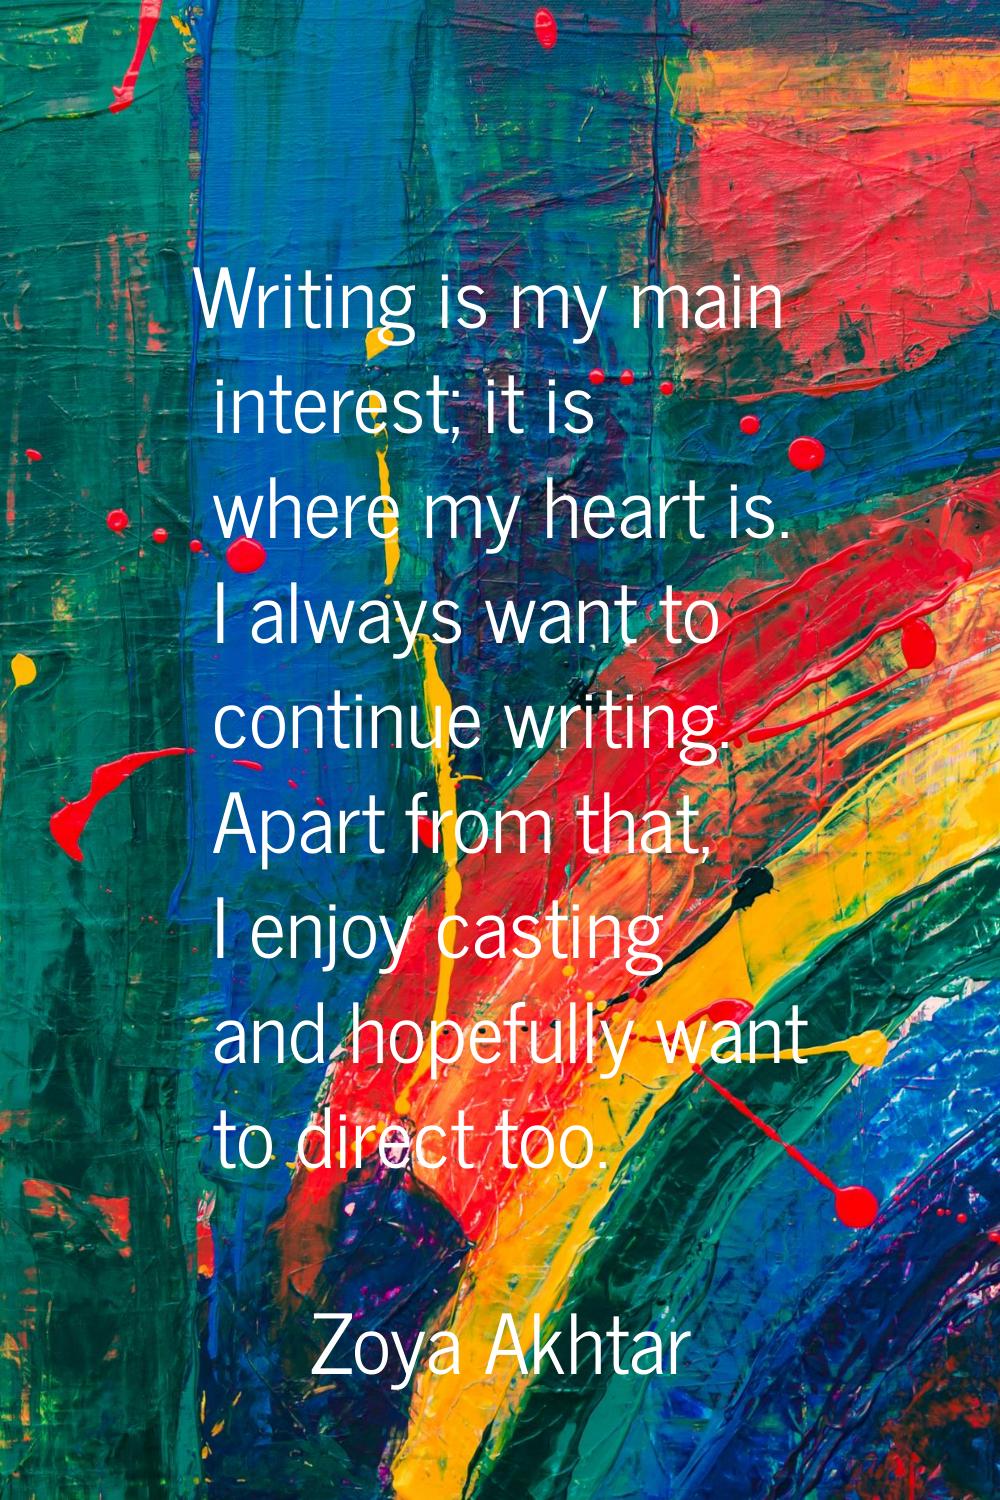 Writing is my main interest; it is where my heart is. I always want to continue writing. Apart from